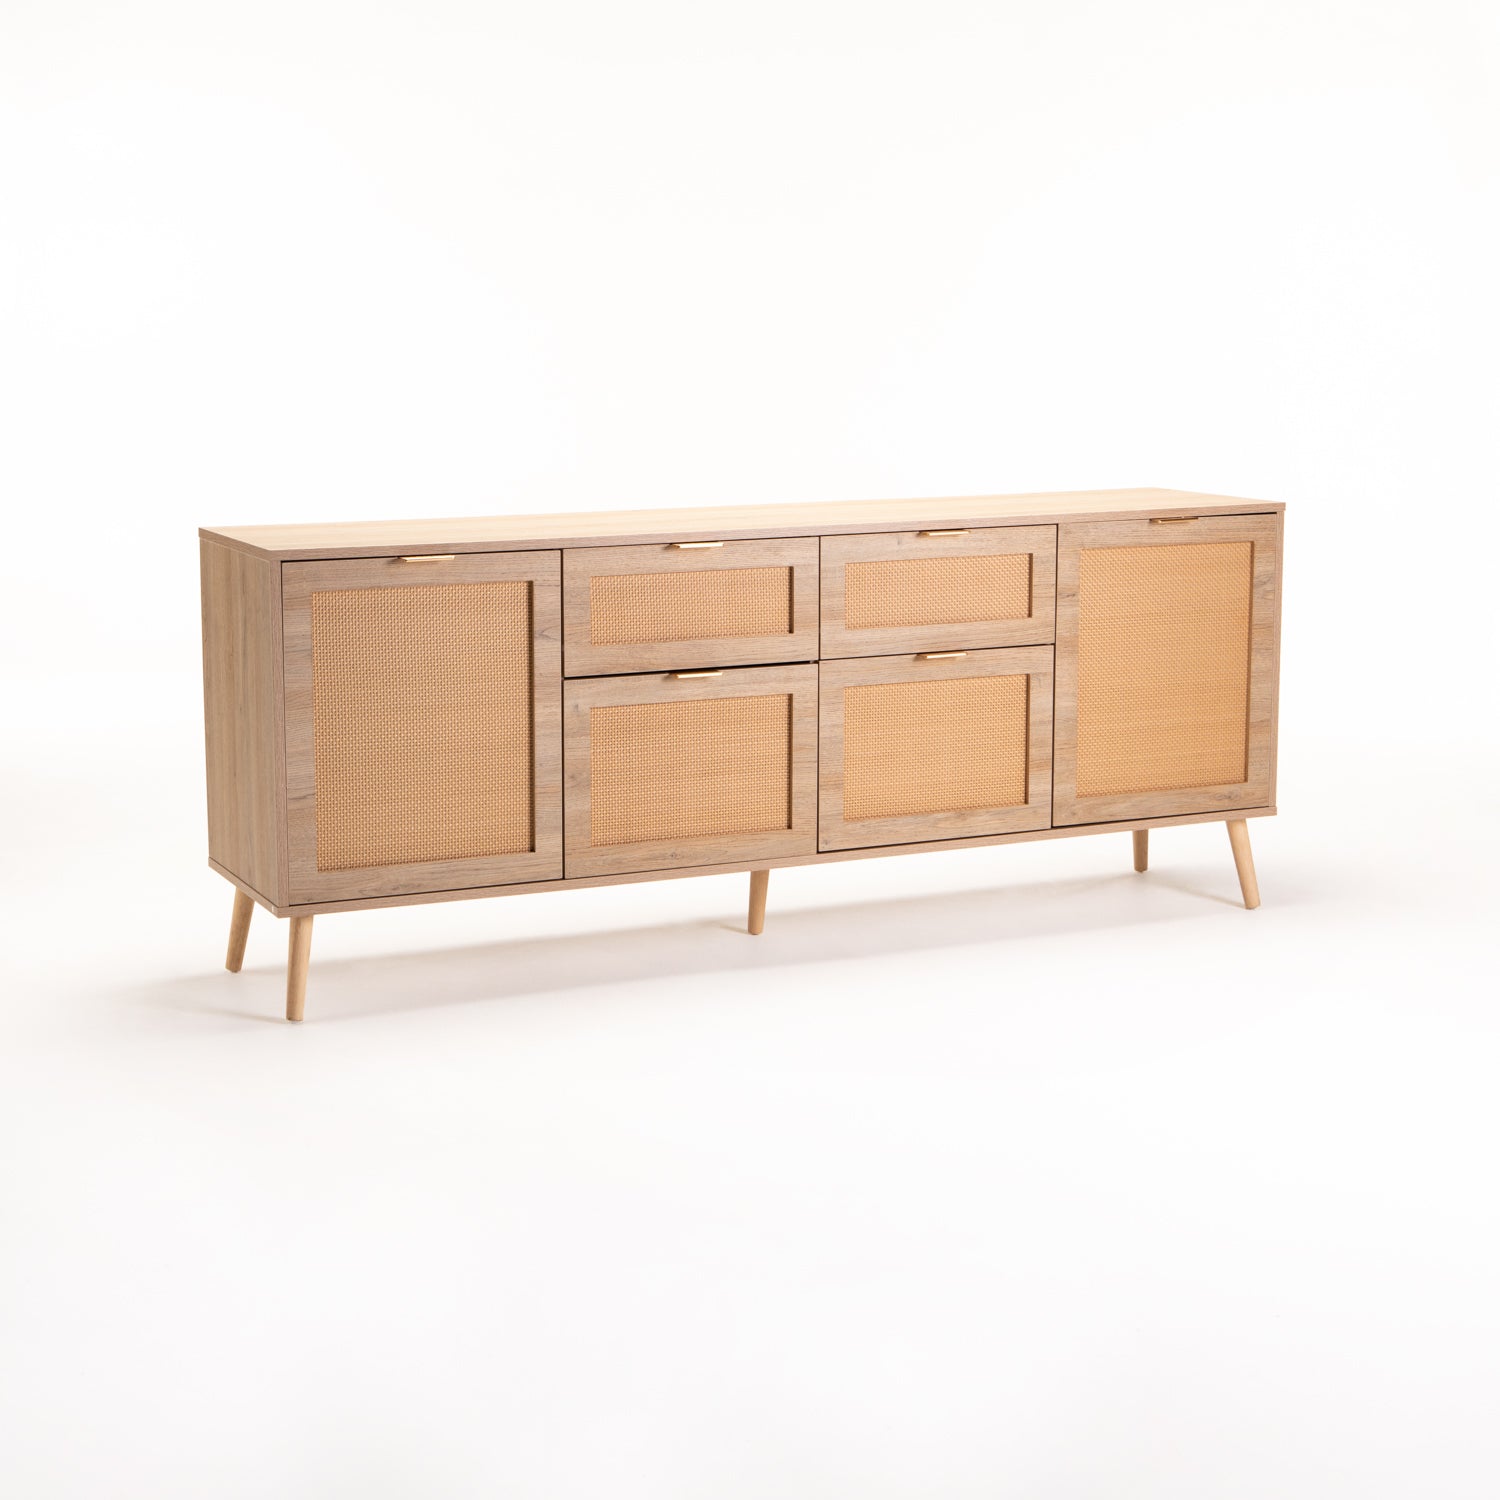 Polo 2 Drawer/4 Door Sideboard - MHF Decor-Delights